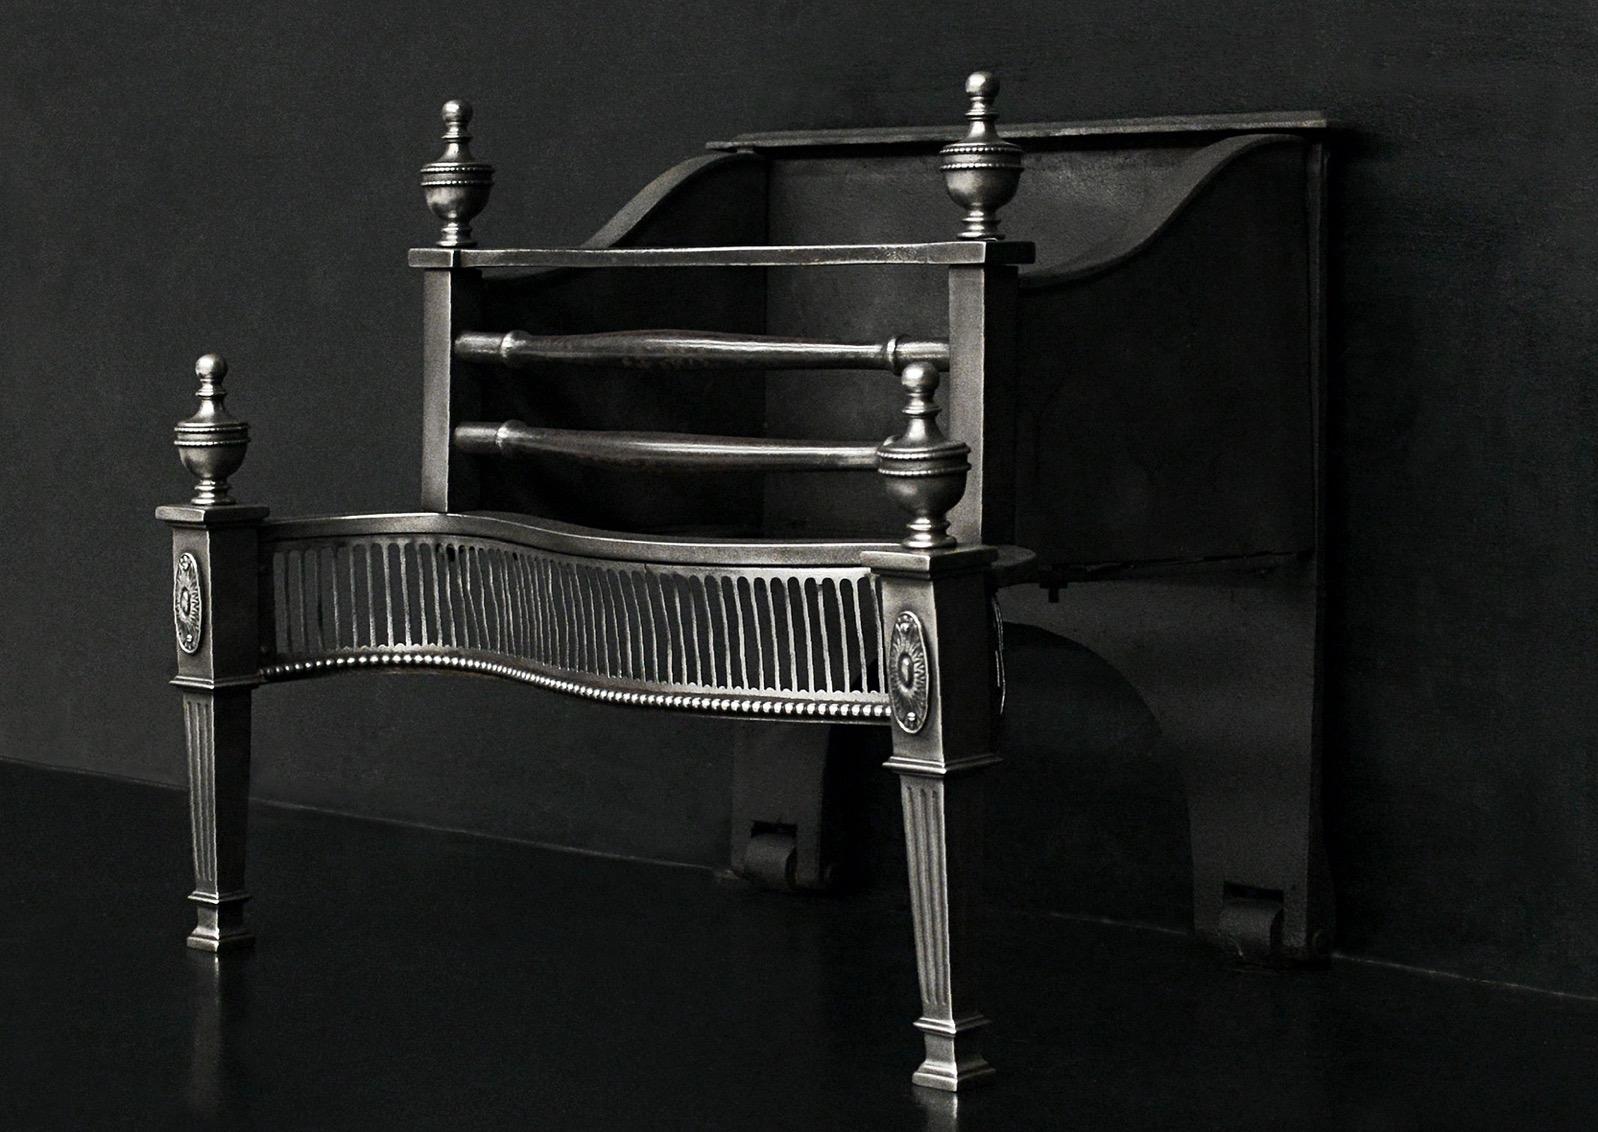 A polished steel Georgian style firegrate. The tapering legs with fluting and oval paterae, surmounted by urn finials with fine rope mouldings. The serpentine fret with fluting throughout and beading below. The burning area with shaped front bars